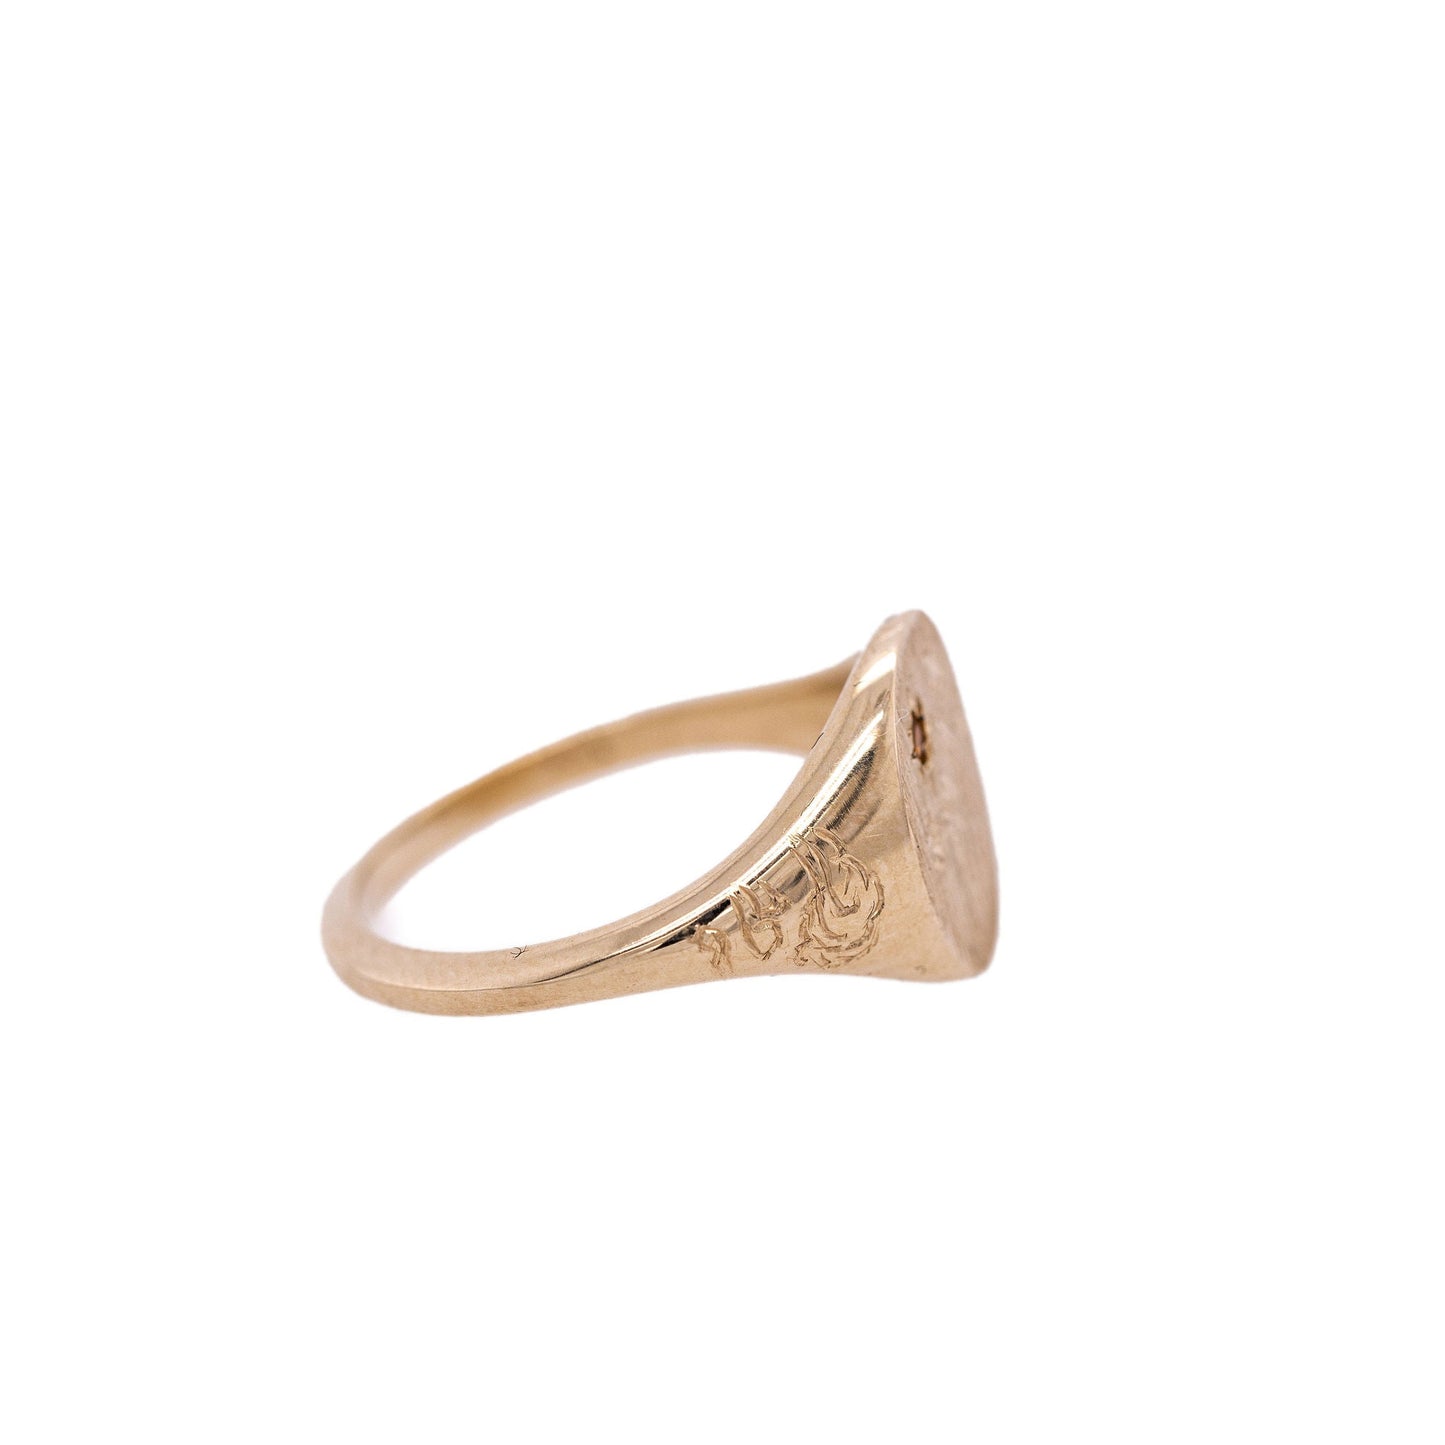 Side view of Hand-engraved gold signet ring with intricate design on a clean white background